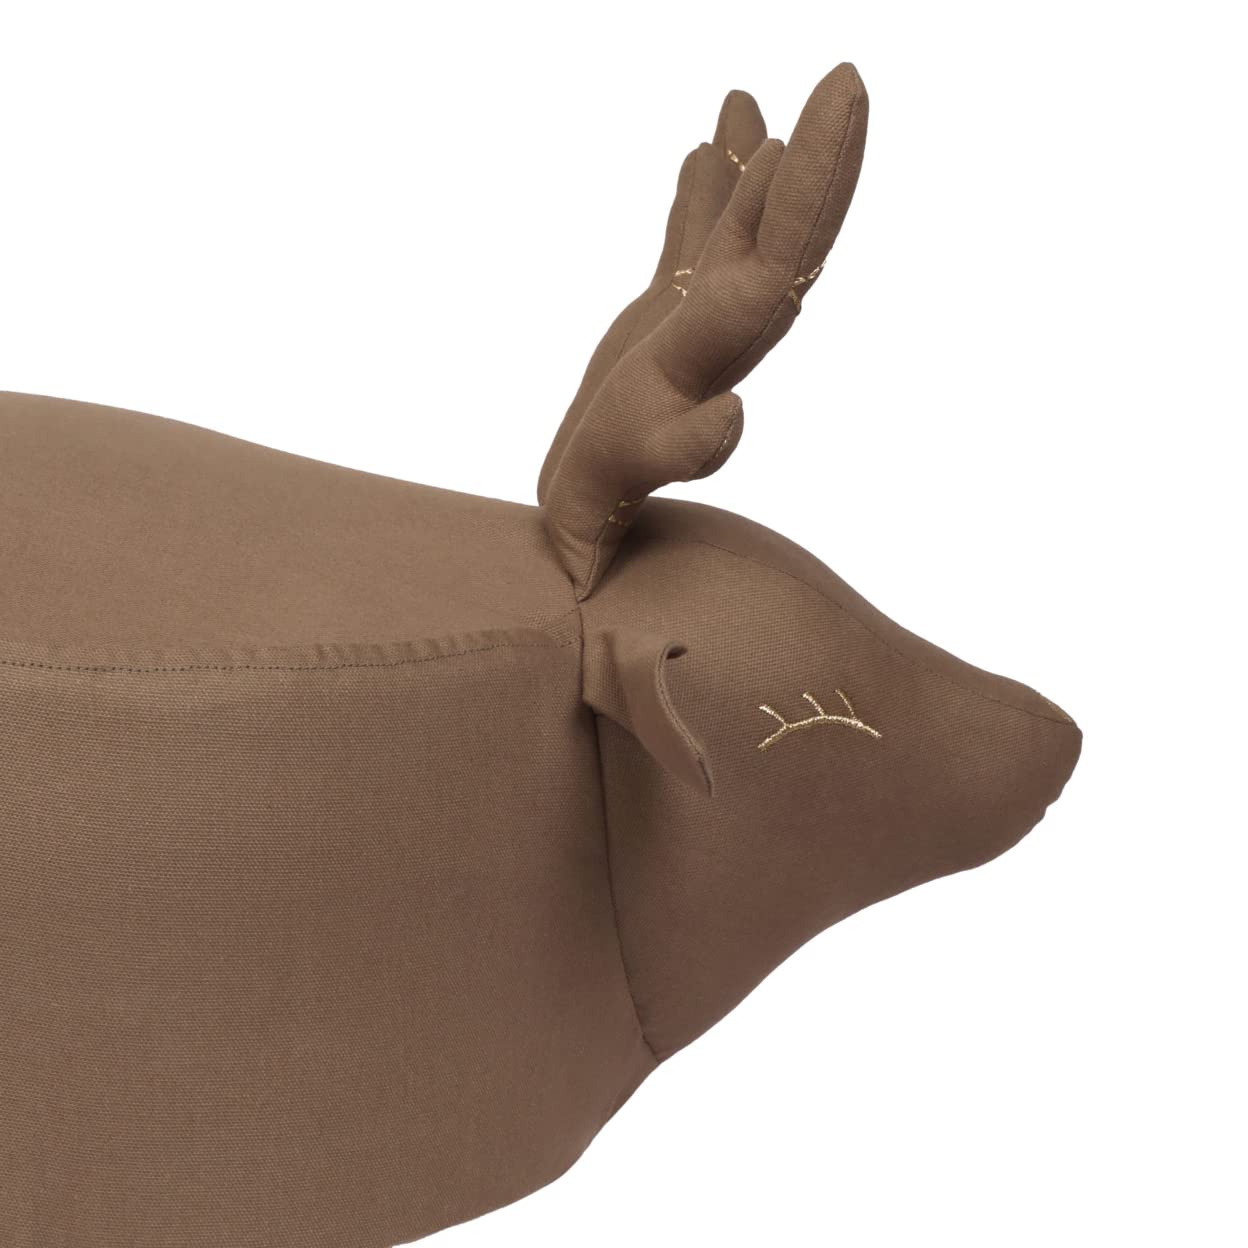 Christopher Knight Home Rivera Contemporary Kids Deer Ottoman, Brown, Brown, Natural